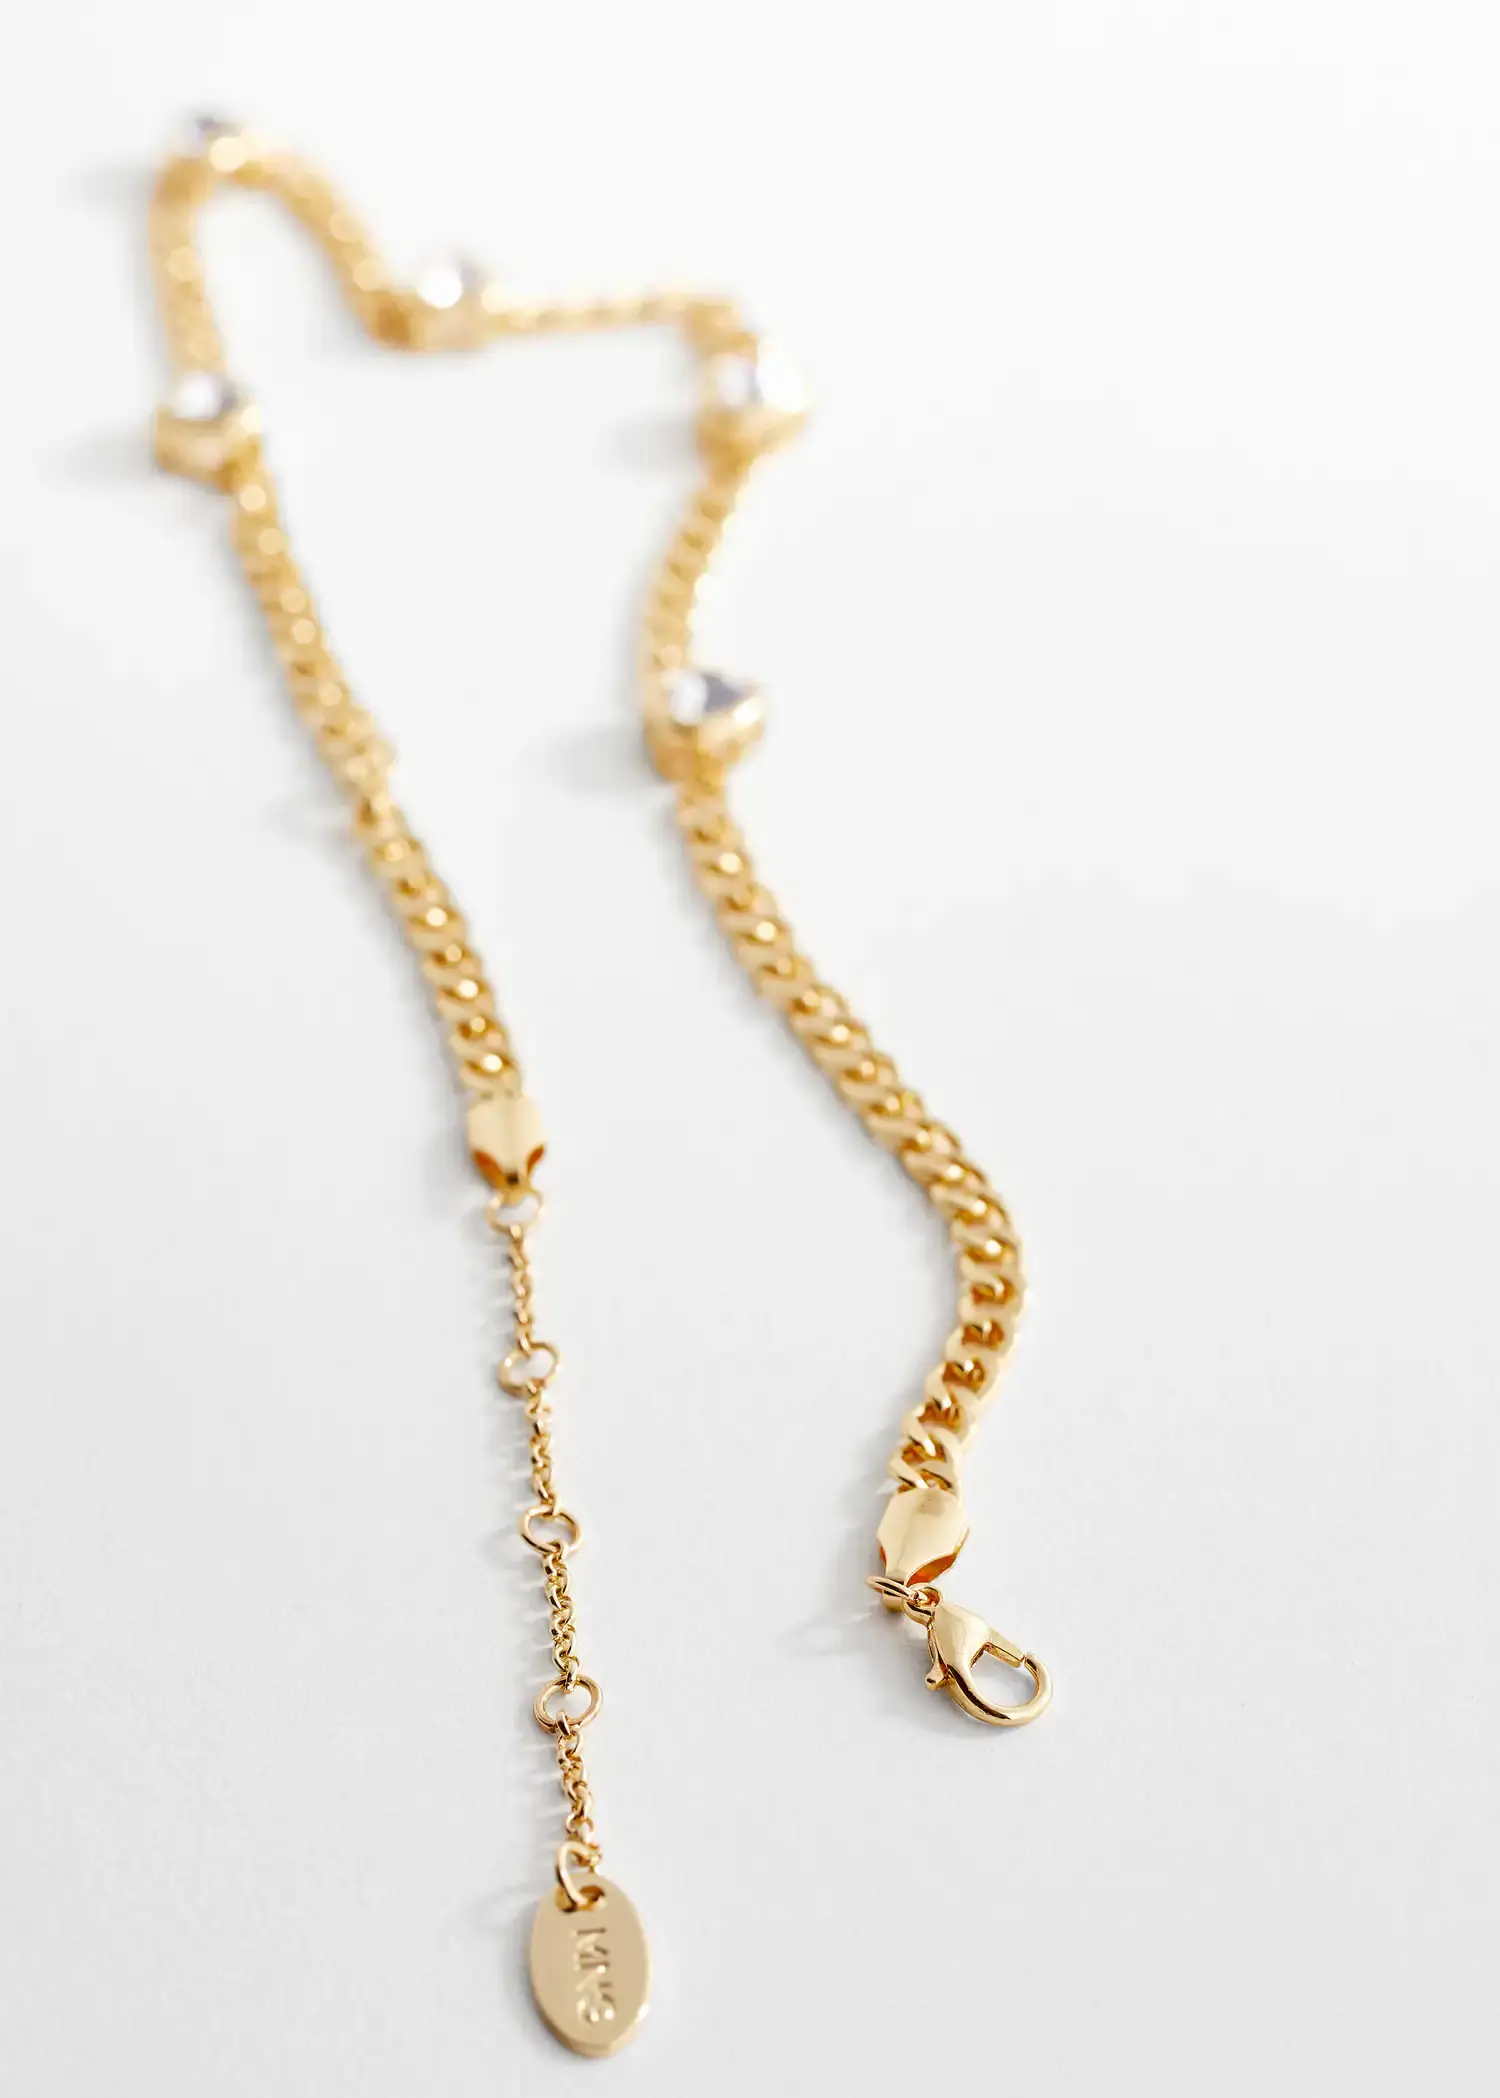 Mango Crystal chain necklace. 2